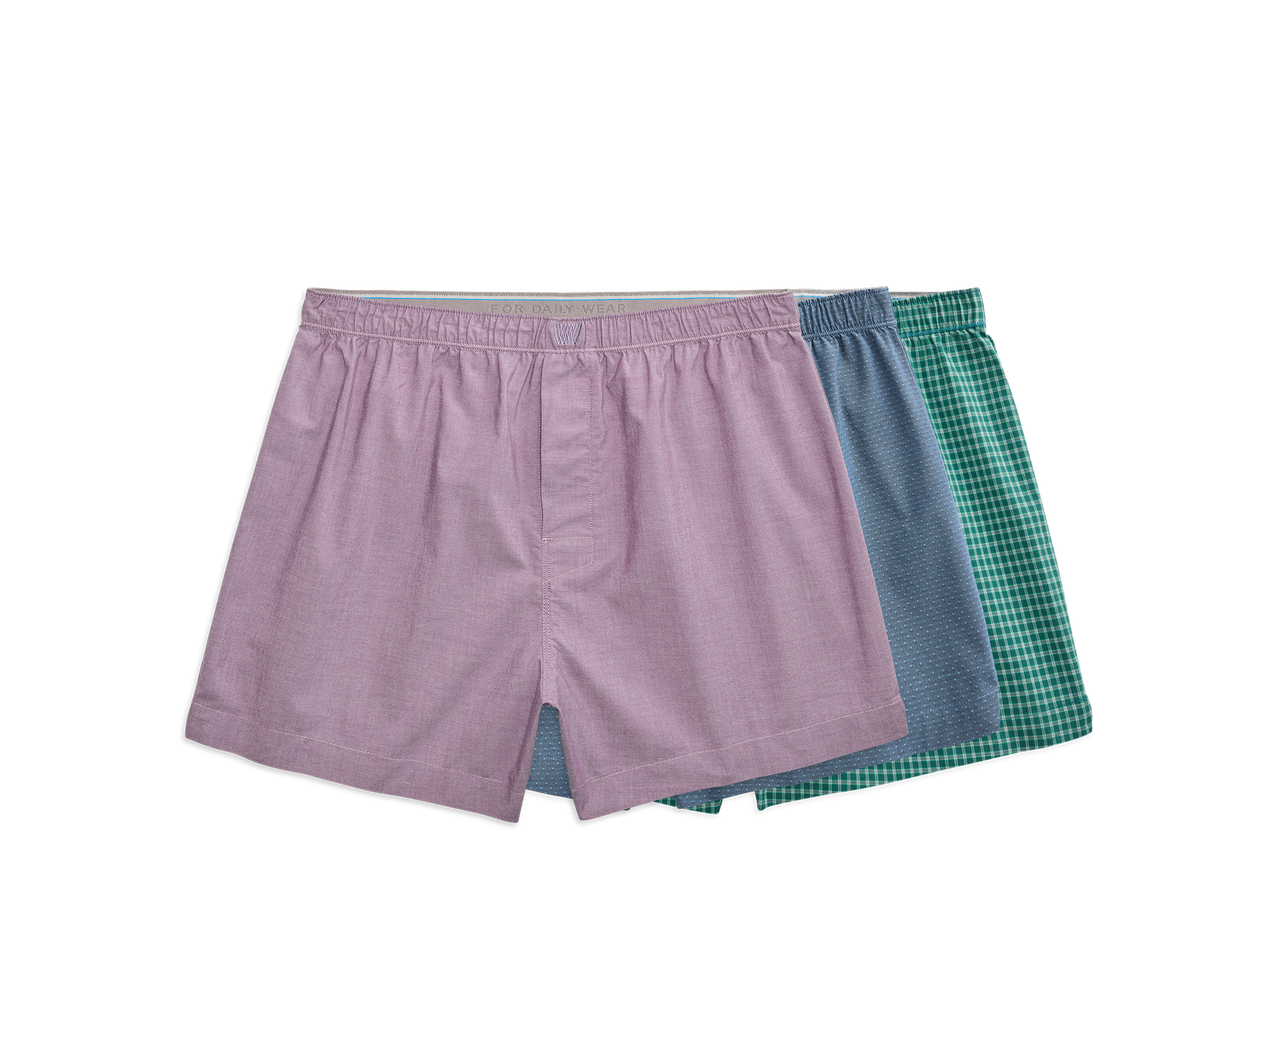 3-Pack 24/7 Woven Boxers